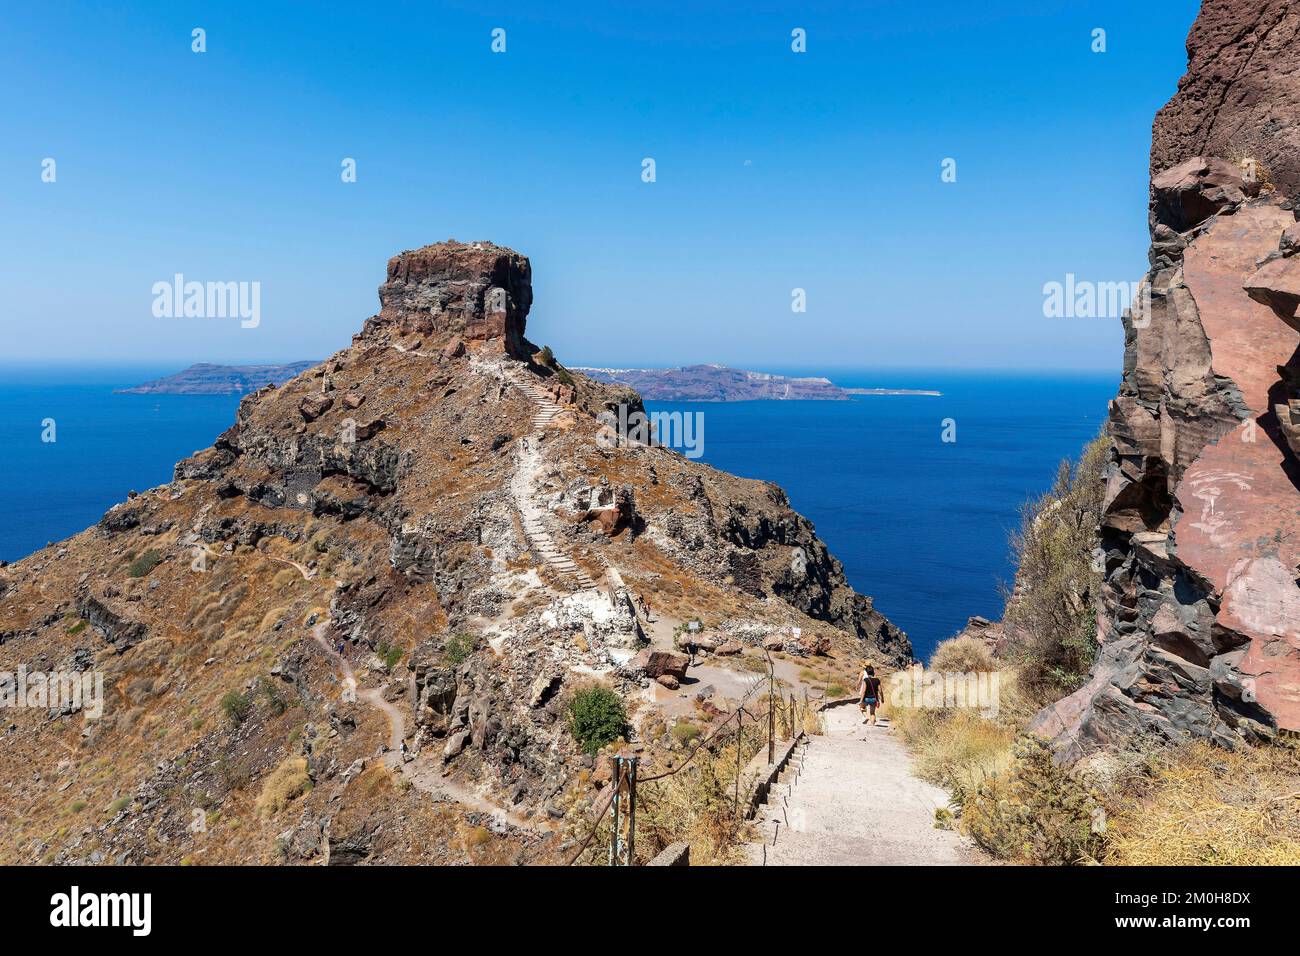 Greece, The Cyclades, Santorini Island (Thera or Thira), village of Fira, woman walking on the path to Skaros rock and ruins of the Venetian fortress of Skaros Stock Photo